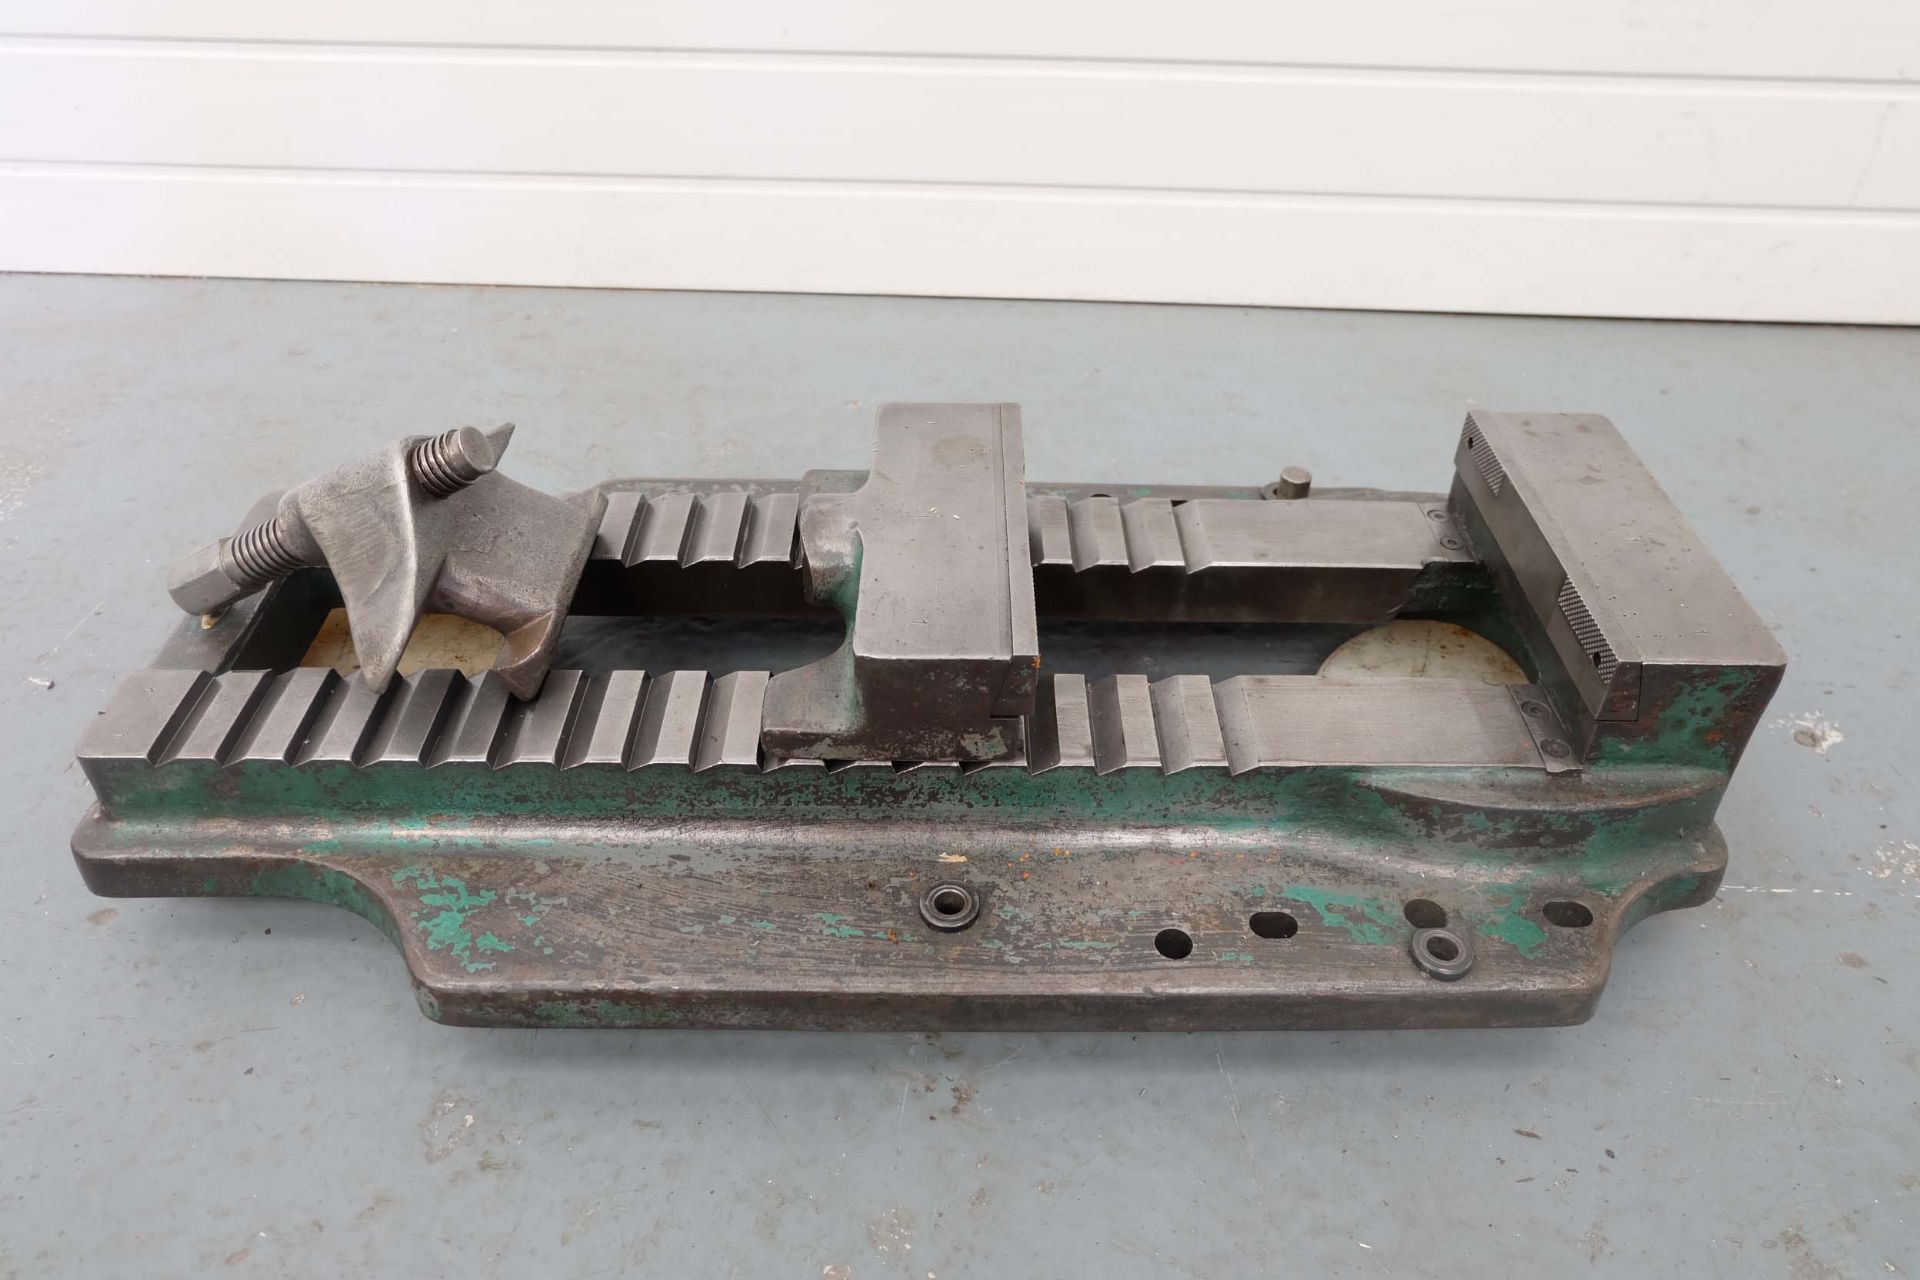 Charles Taylor Rack Vice. Max Opening 16". Jaw Width 8". Jaw Height 2 1/4".